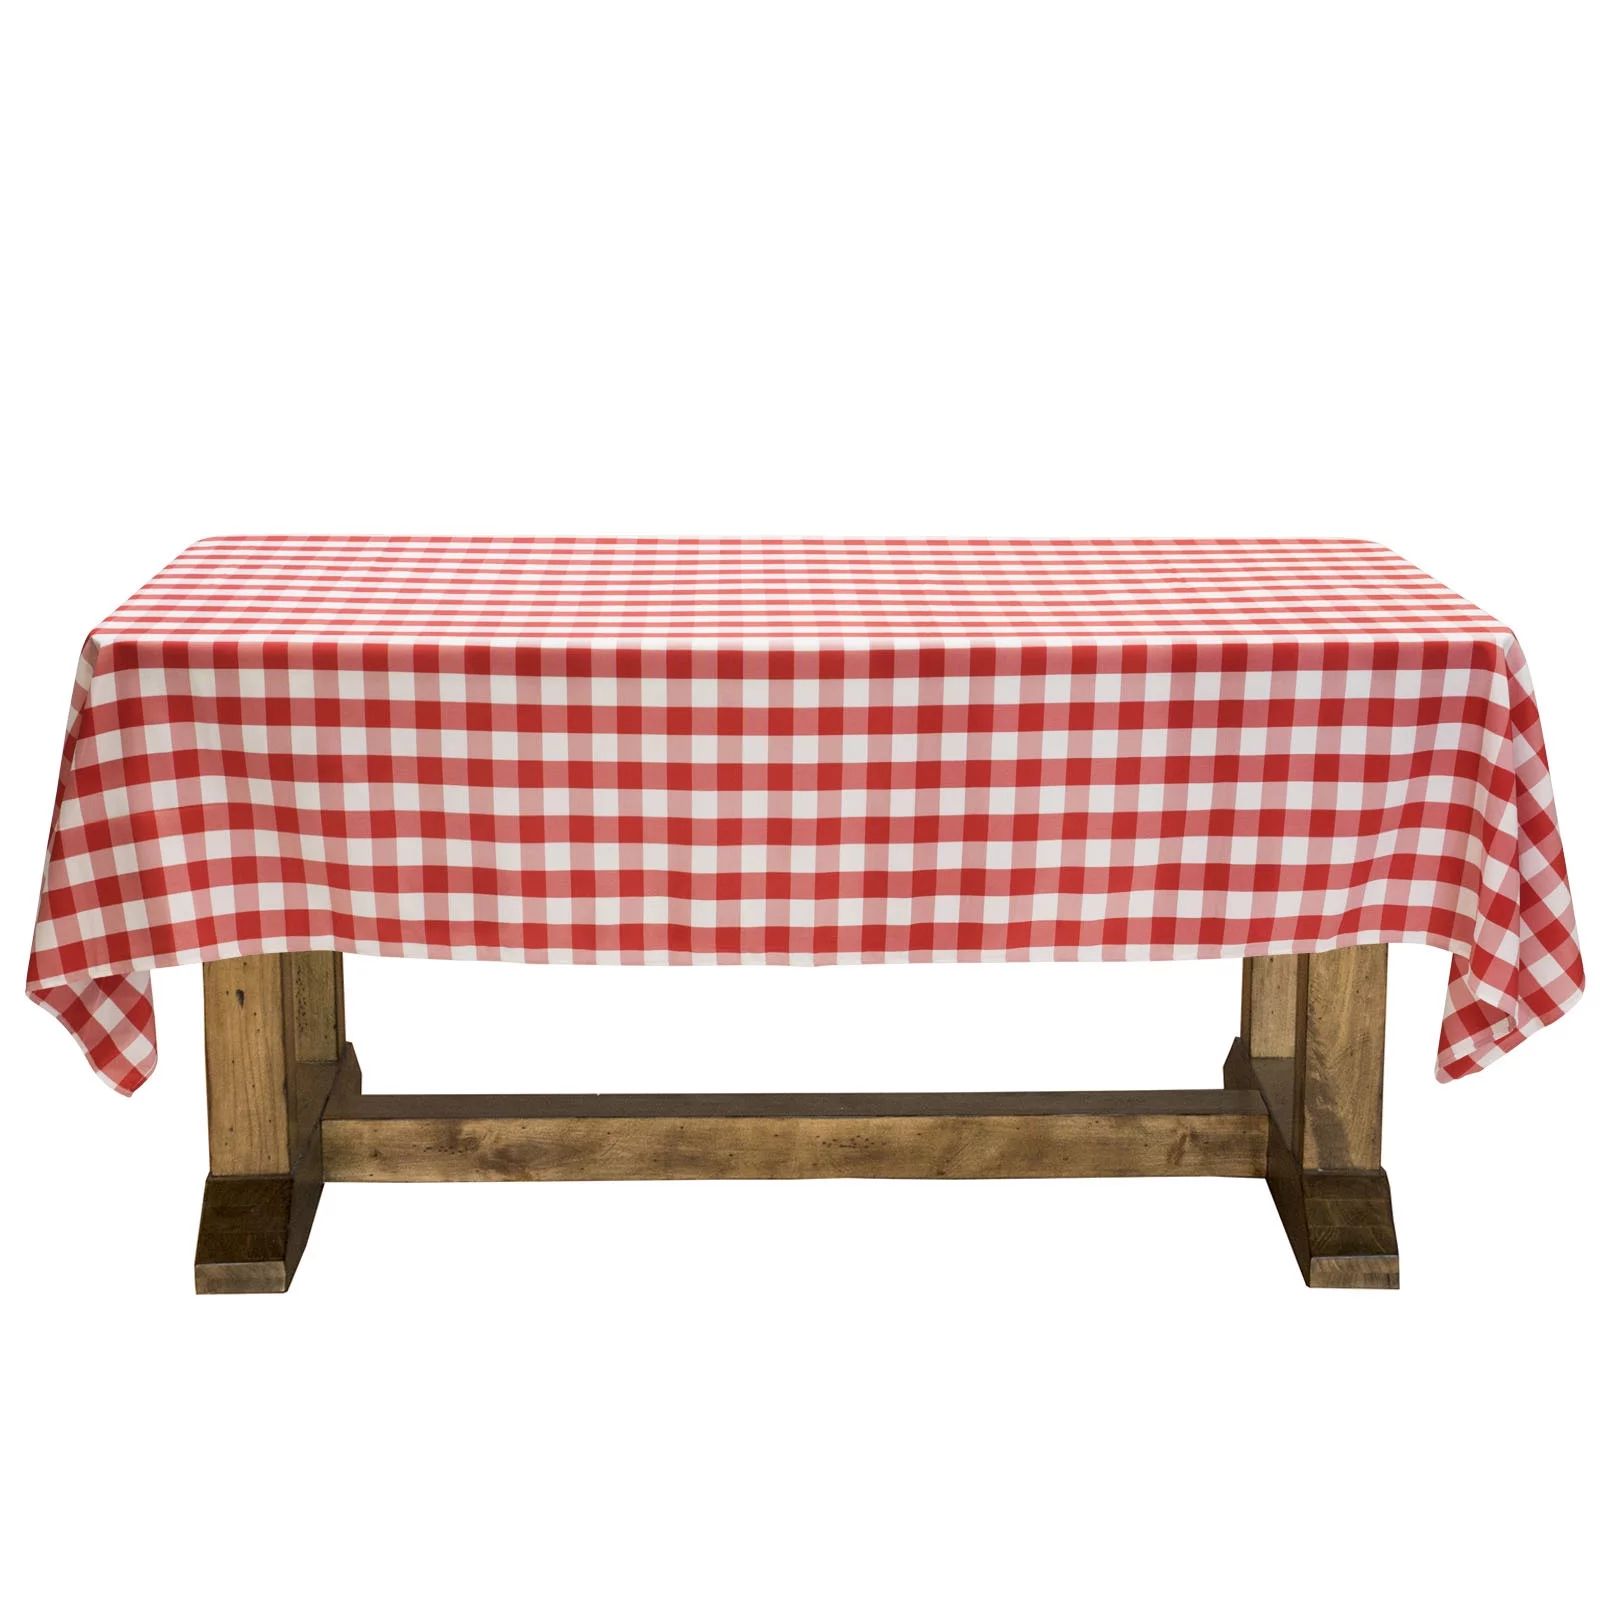 Lann's Linens - Red & White Checkered Tablecloth - Premium Polyester Picnic Table Cover - Gingham... | Walmart (US)